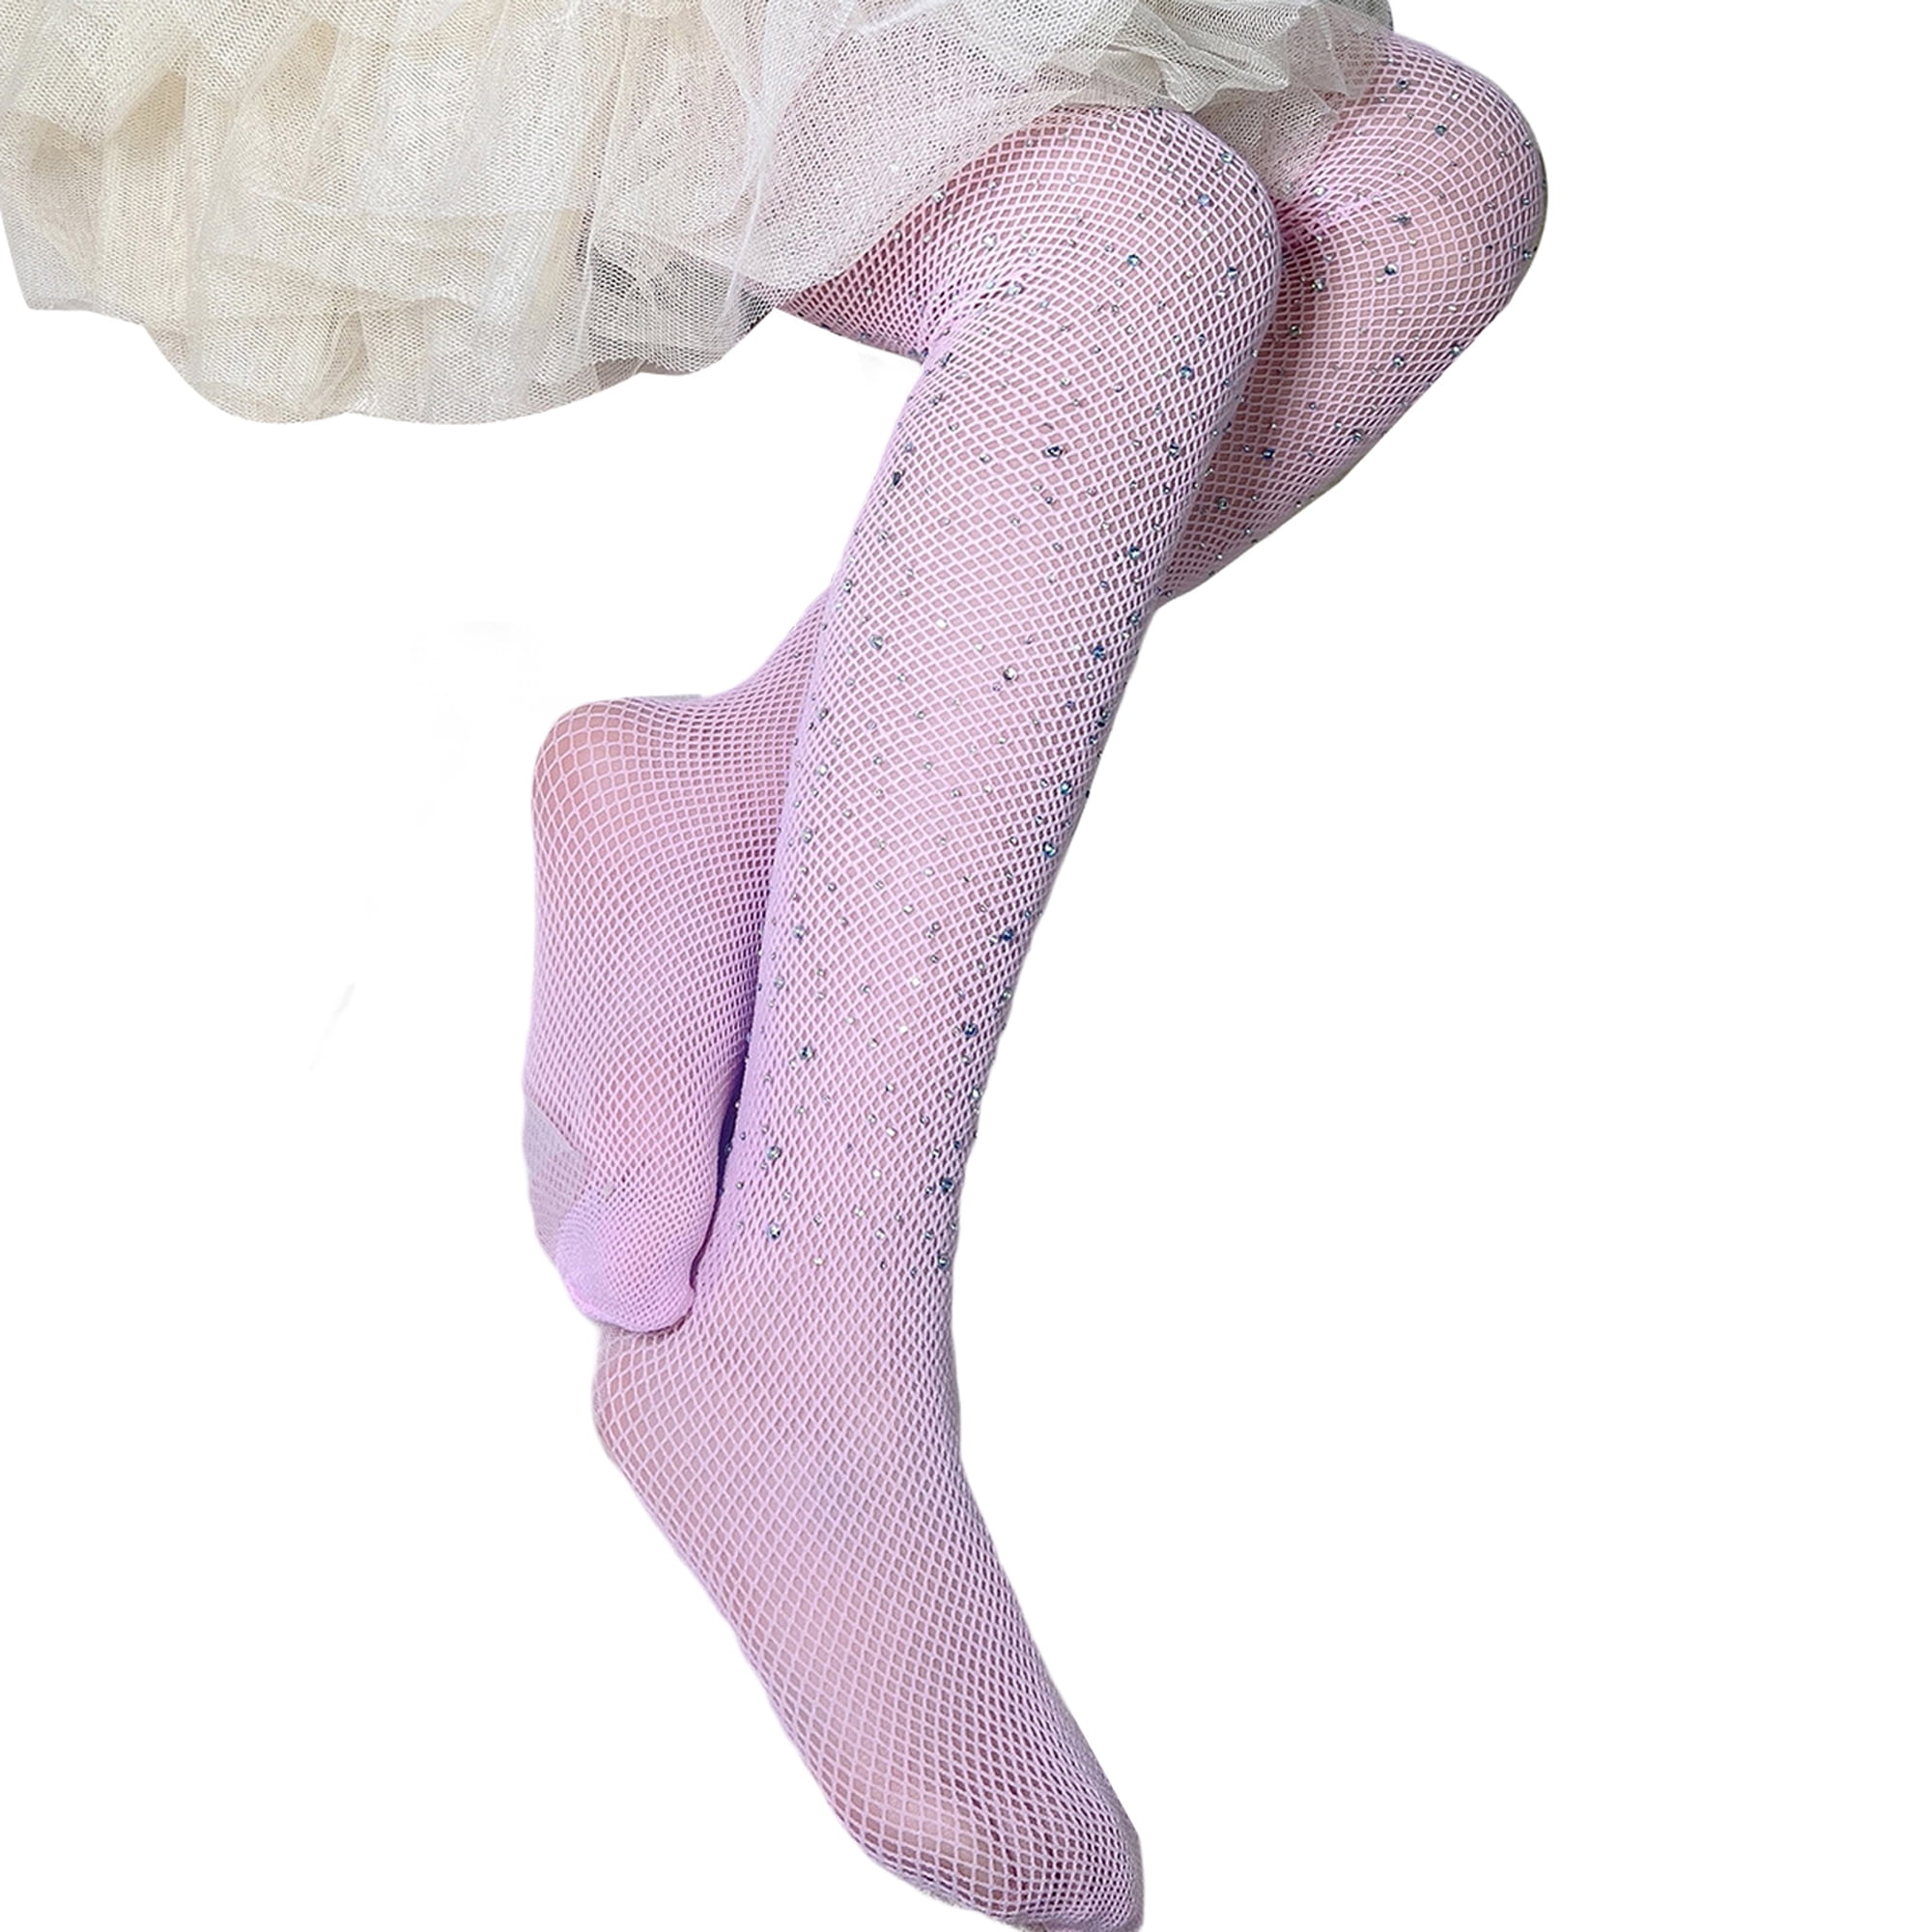 LUCKELF Girls Tights Children's Fishnet Tight 12 Colors Sparkle Rhinestone  Hollow Out Pantyhose